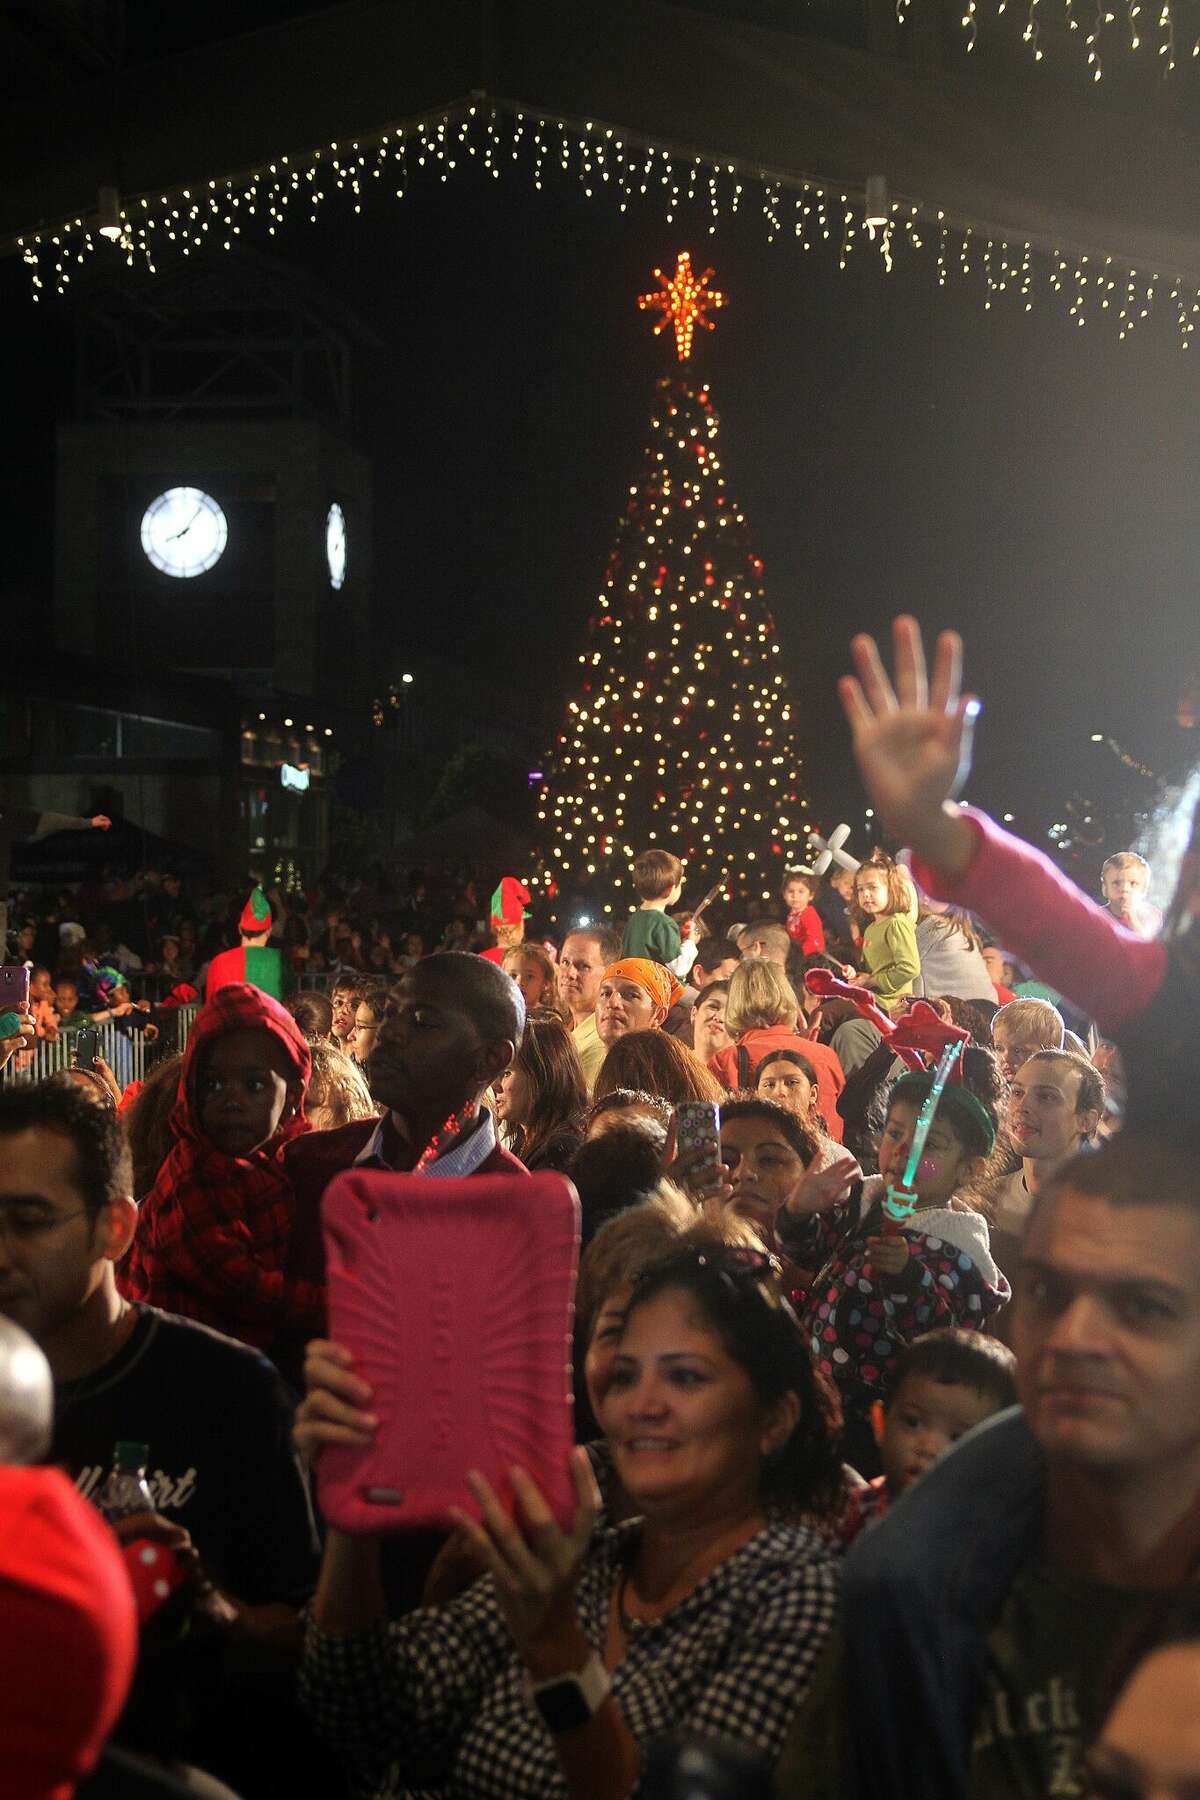 Thousands gather to watch the annual tree lighting ceremony during the Annual Hometown Christmas Festival at Pearland Town Center. This year's event is on Nov. 26.